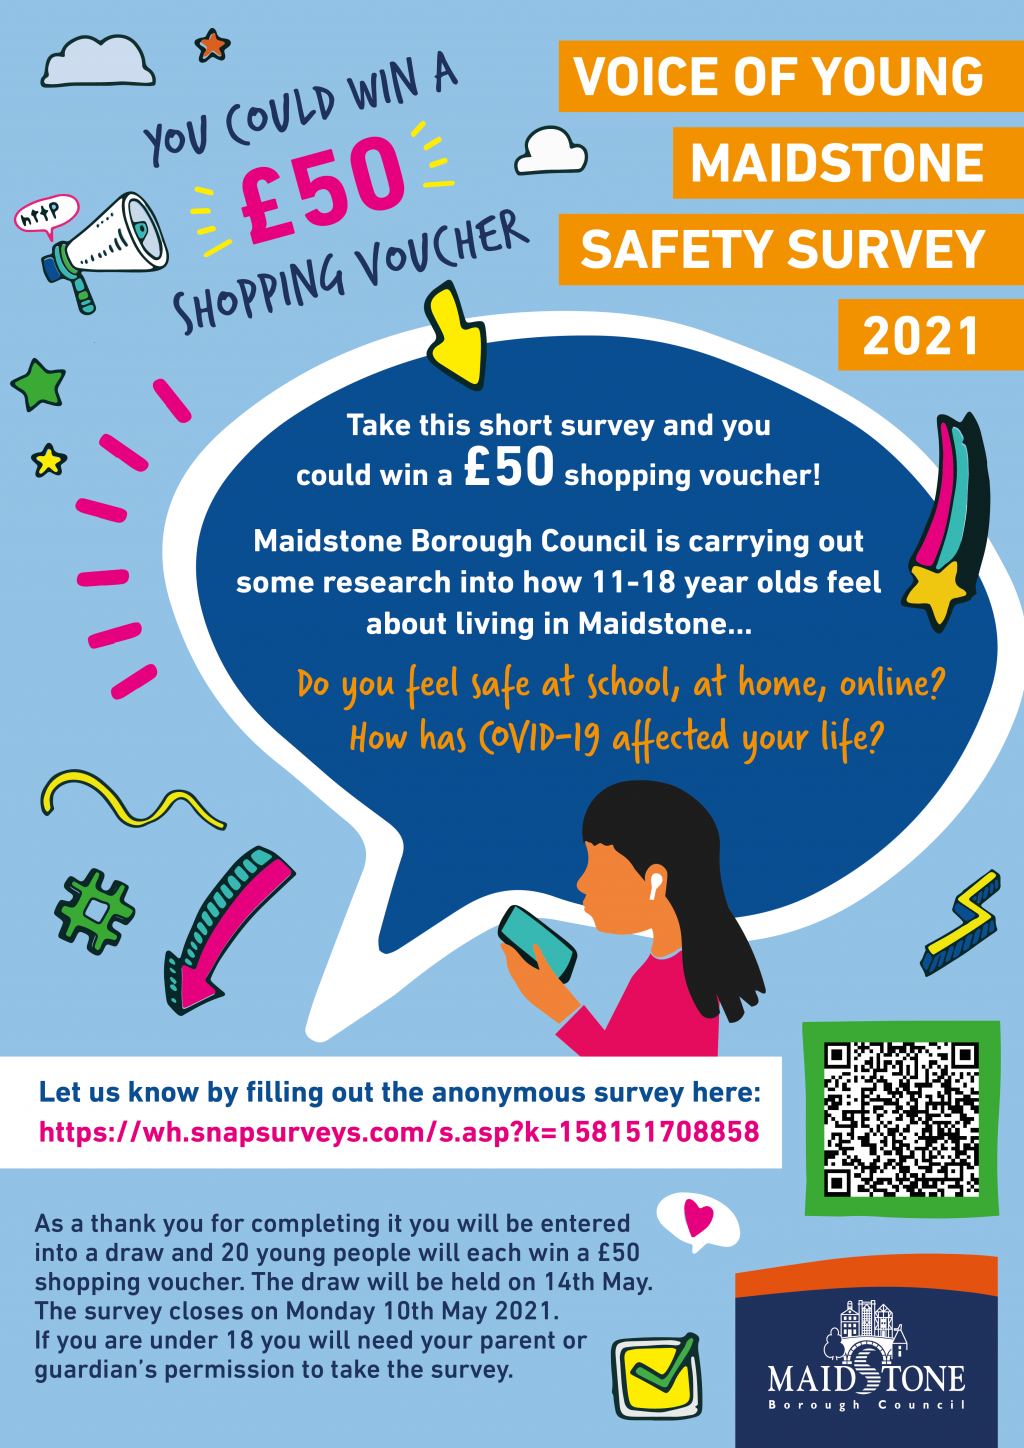 Voice of Young Maidstone Safety Survey 2021 image